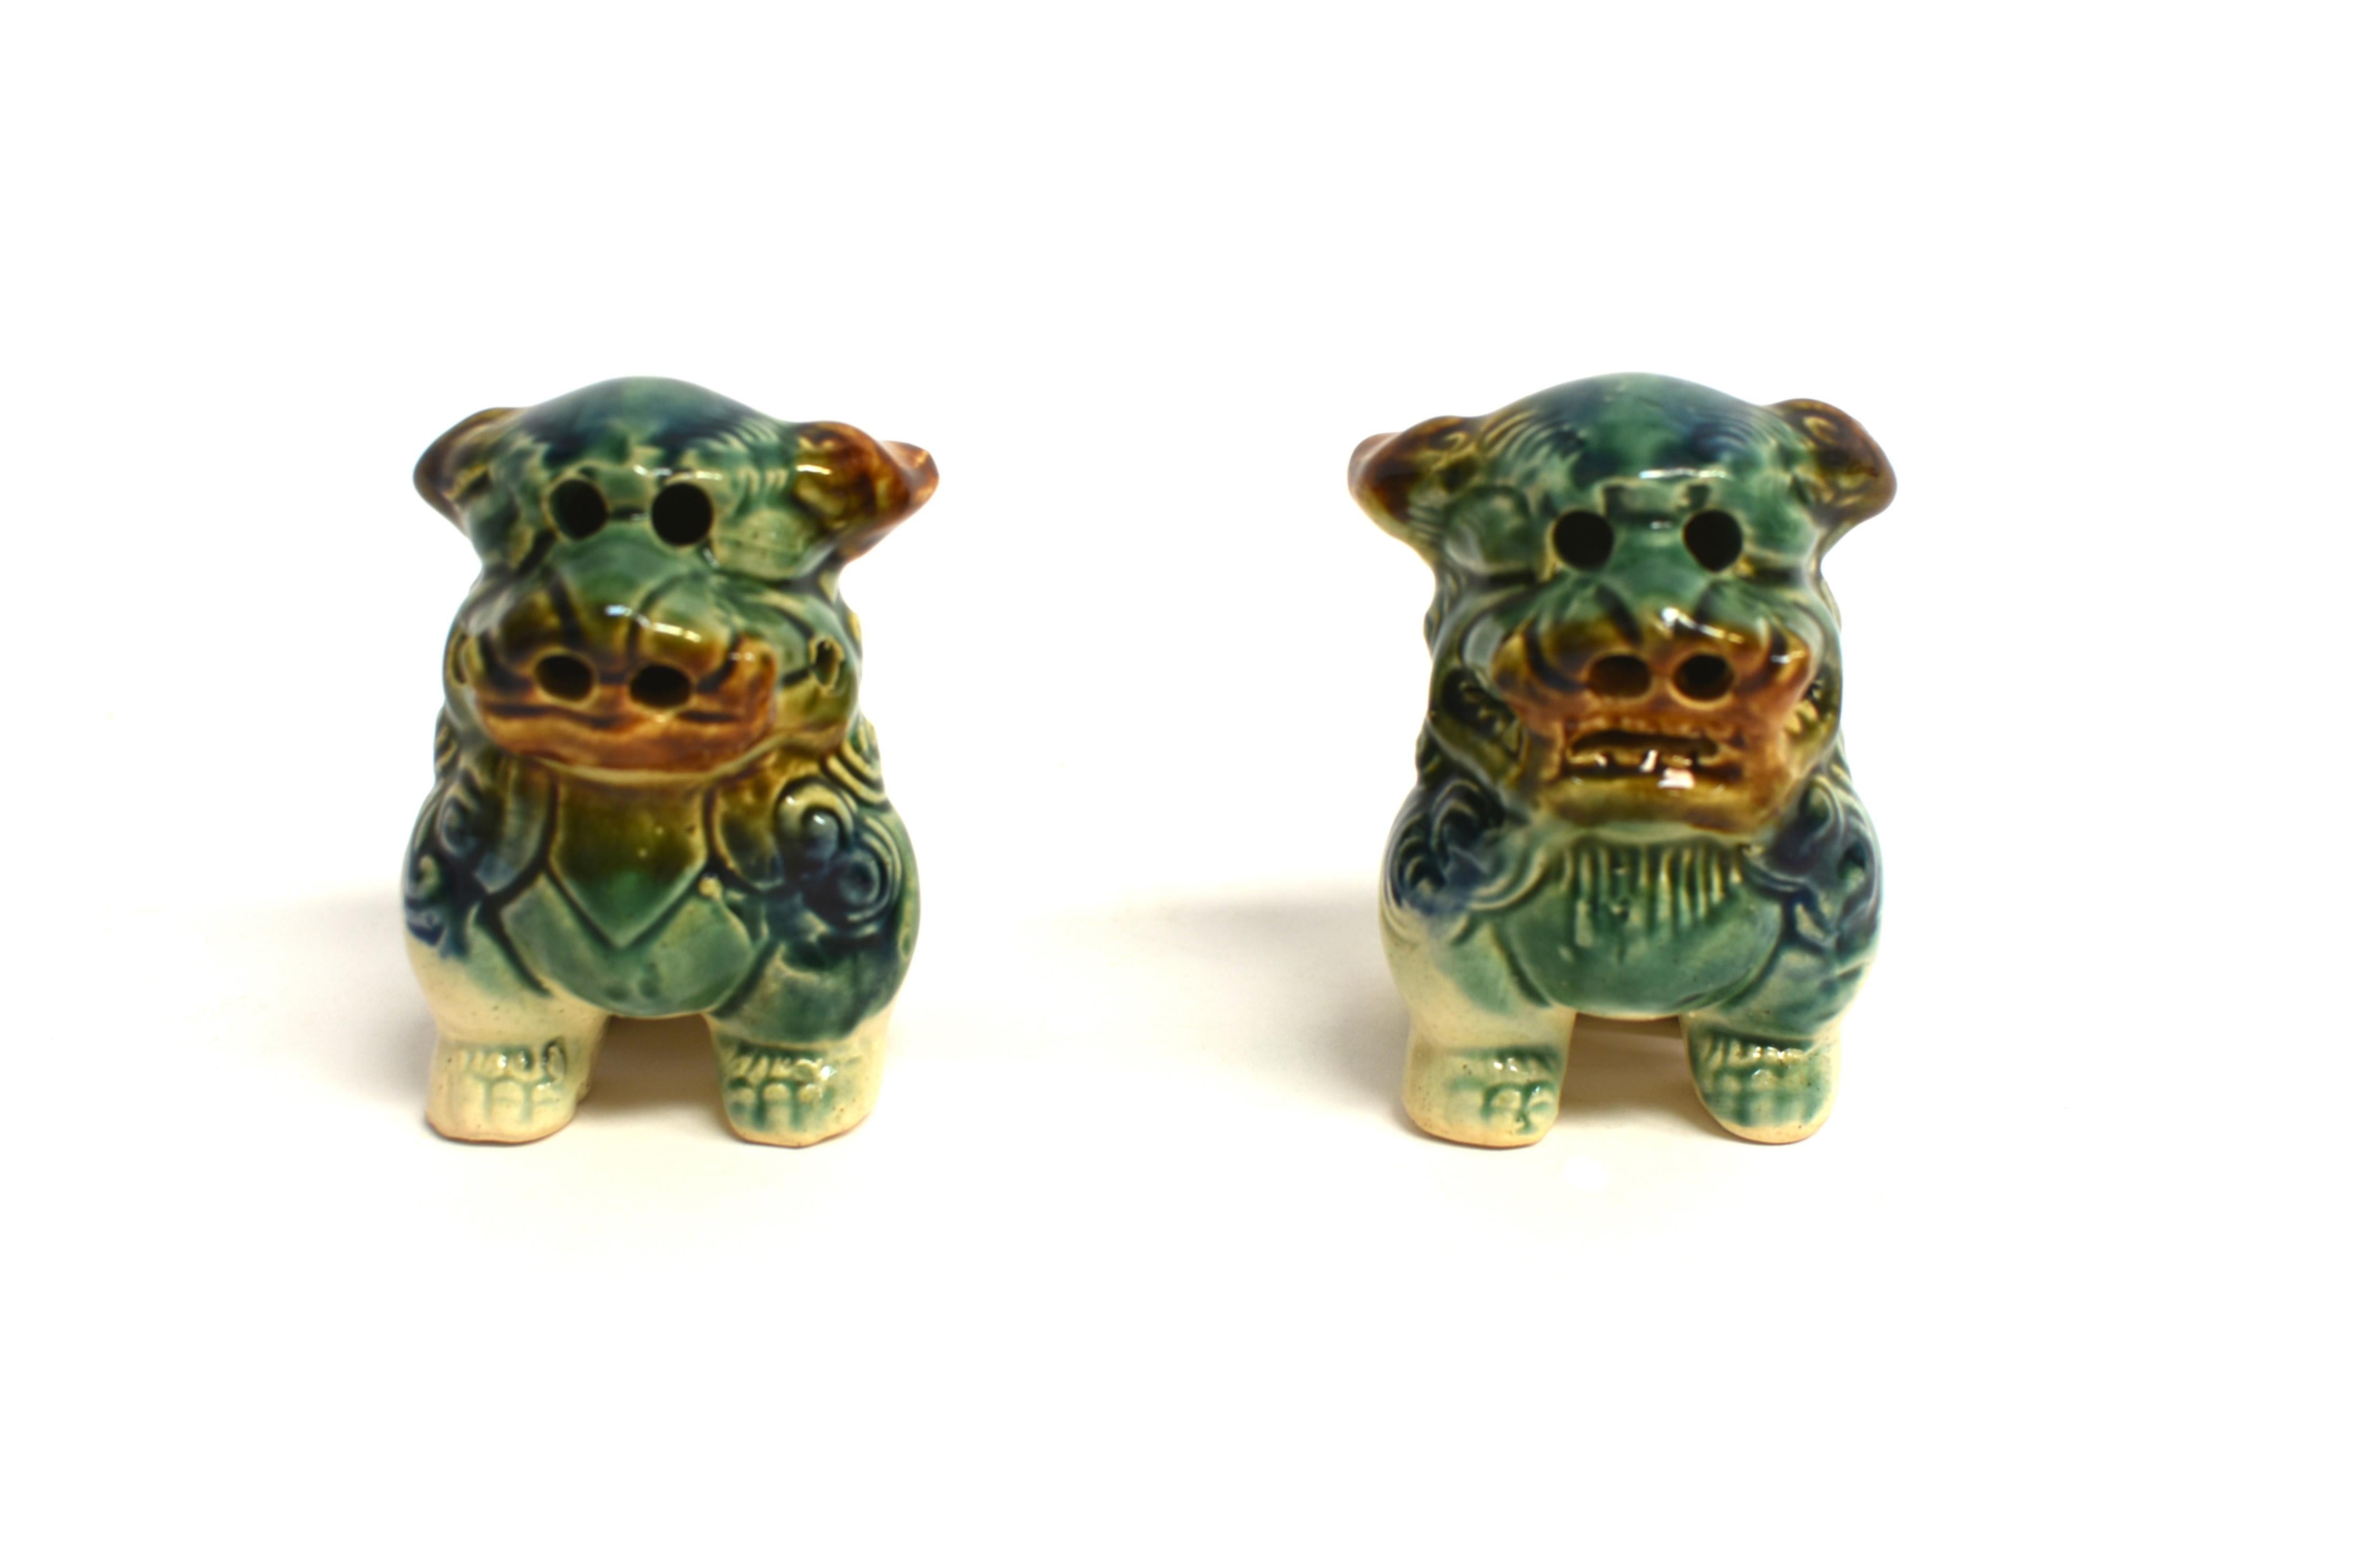 A pair of most adorable ceramic foo dog puppies. The large heads covered in curly hair with open mouths in a grin and perky ears. Short stubby legs and upright tails. The tri-glaze comprise caramel, blue and green color, hand applied to the puppies.